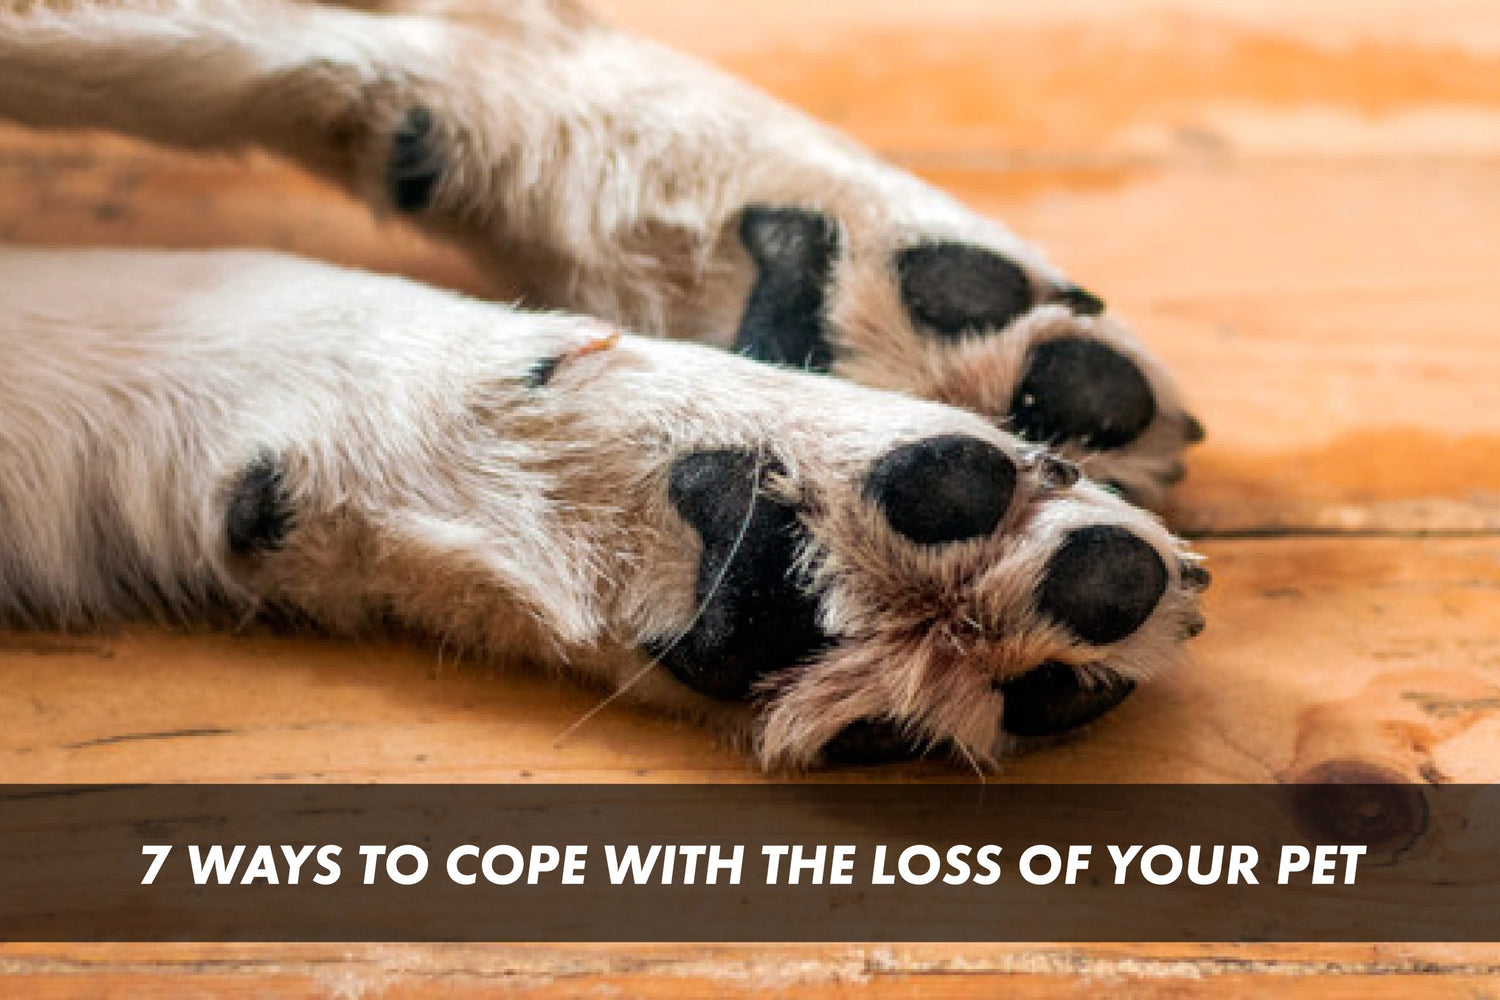 7 Ways to Cope with the Loss of your Pet